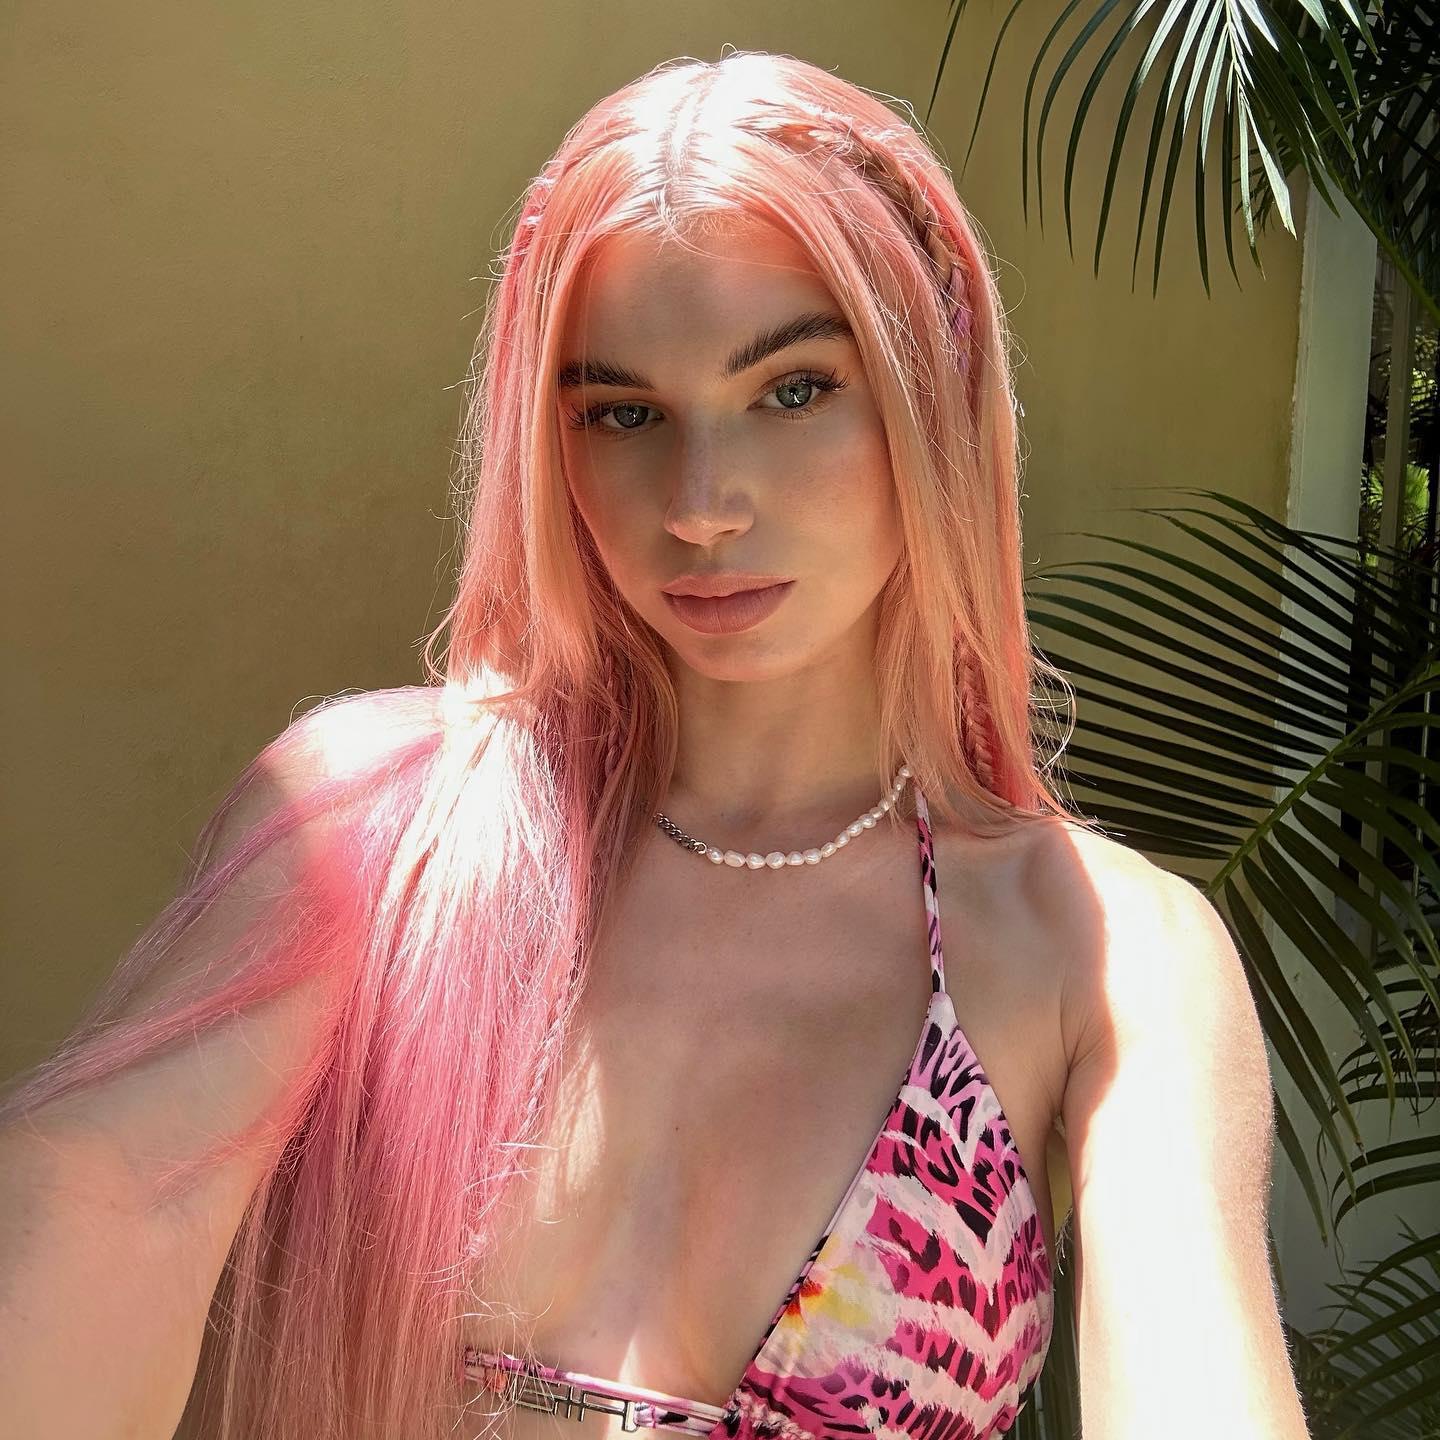 Brittan Byrd Leaves Little To The Imagination Showing Off Her ‘Pink Obsession’